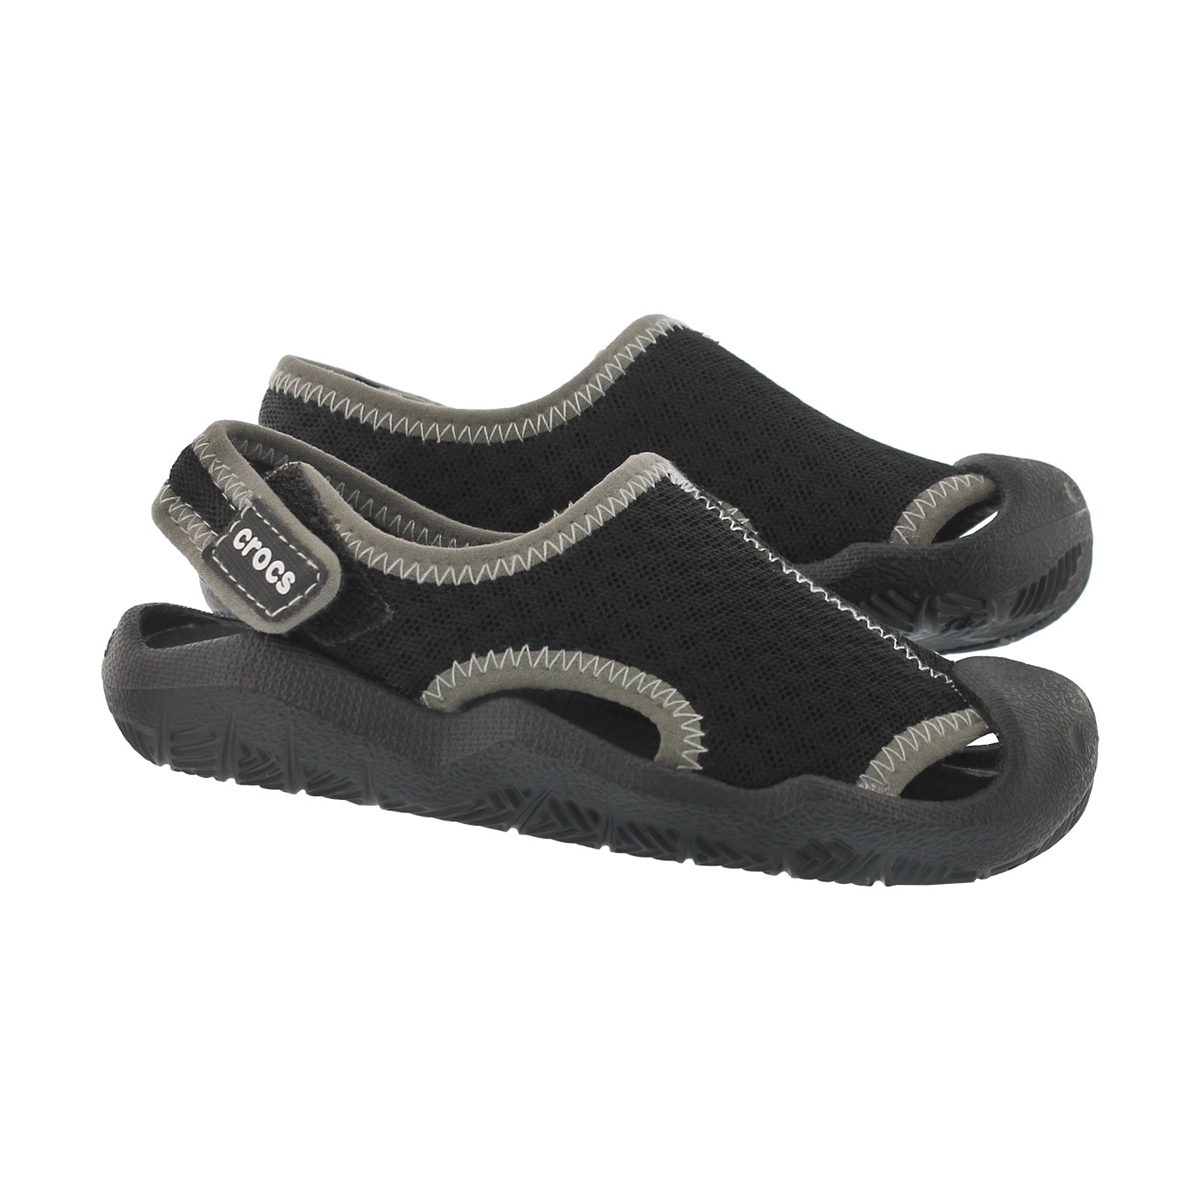 Boy's Swiftwater Casual Sandal -  Black/White